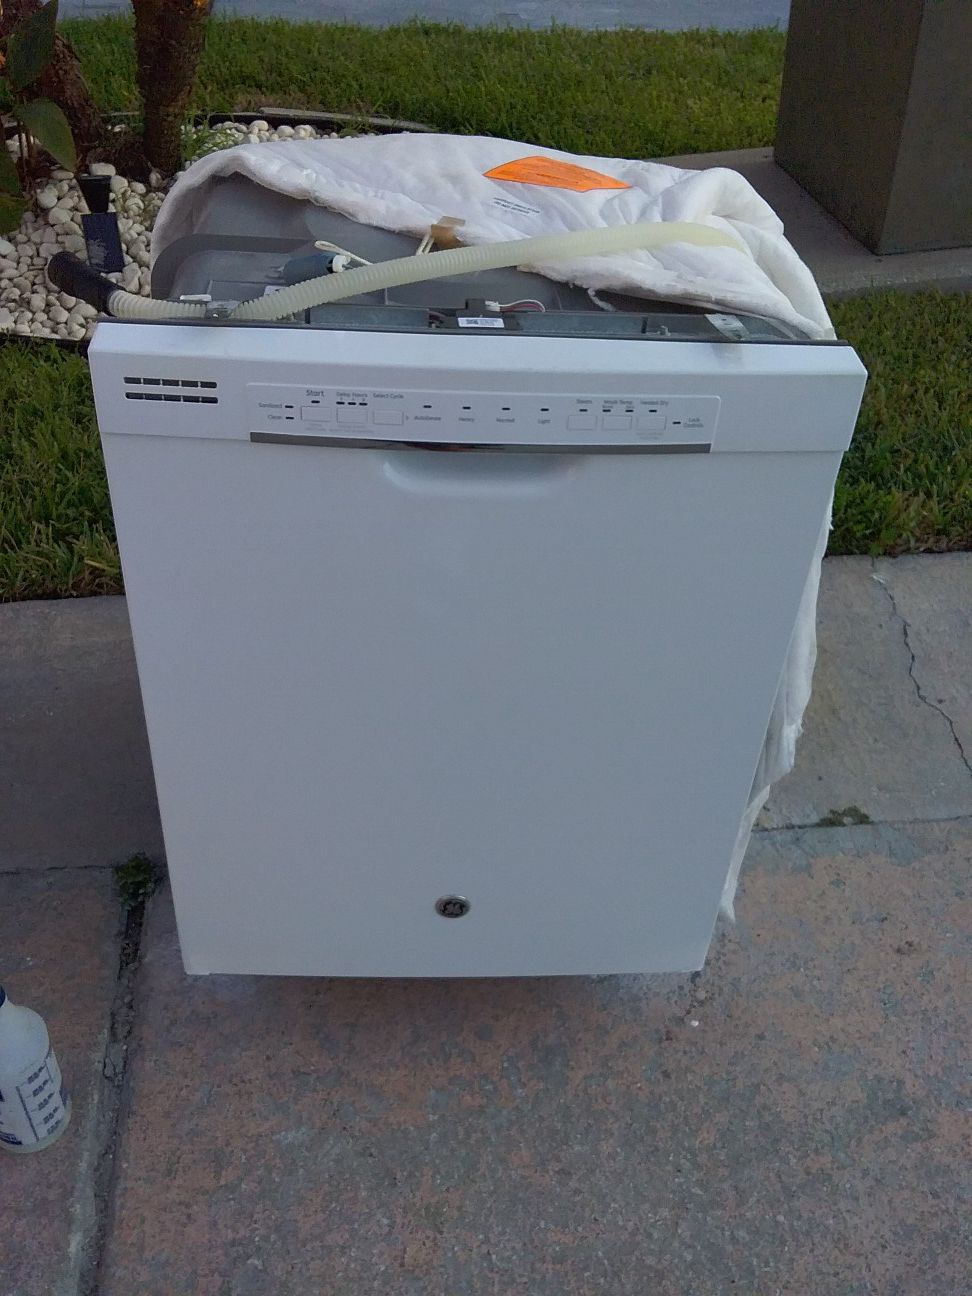 White ge dishwasher with plastic tub in excellent working condition